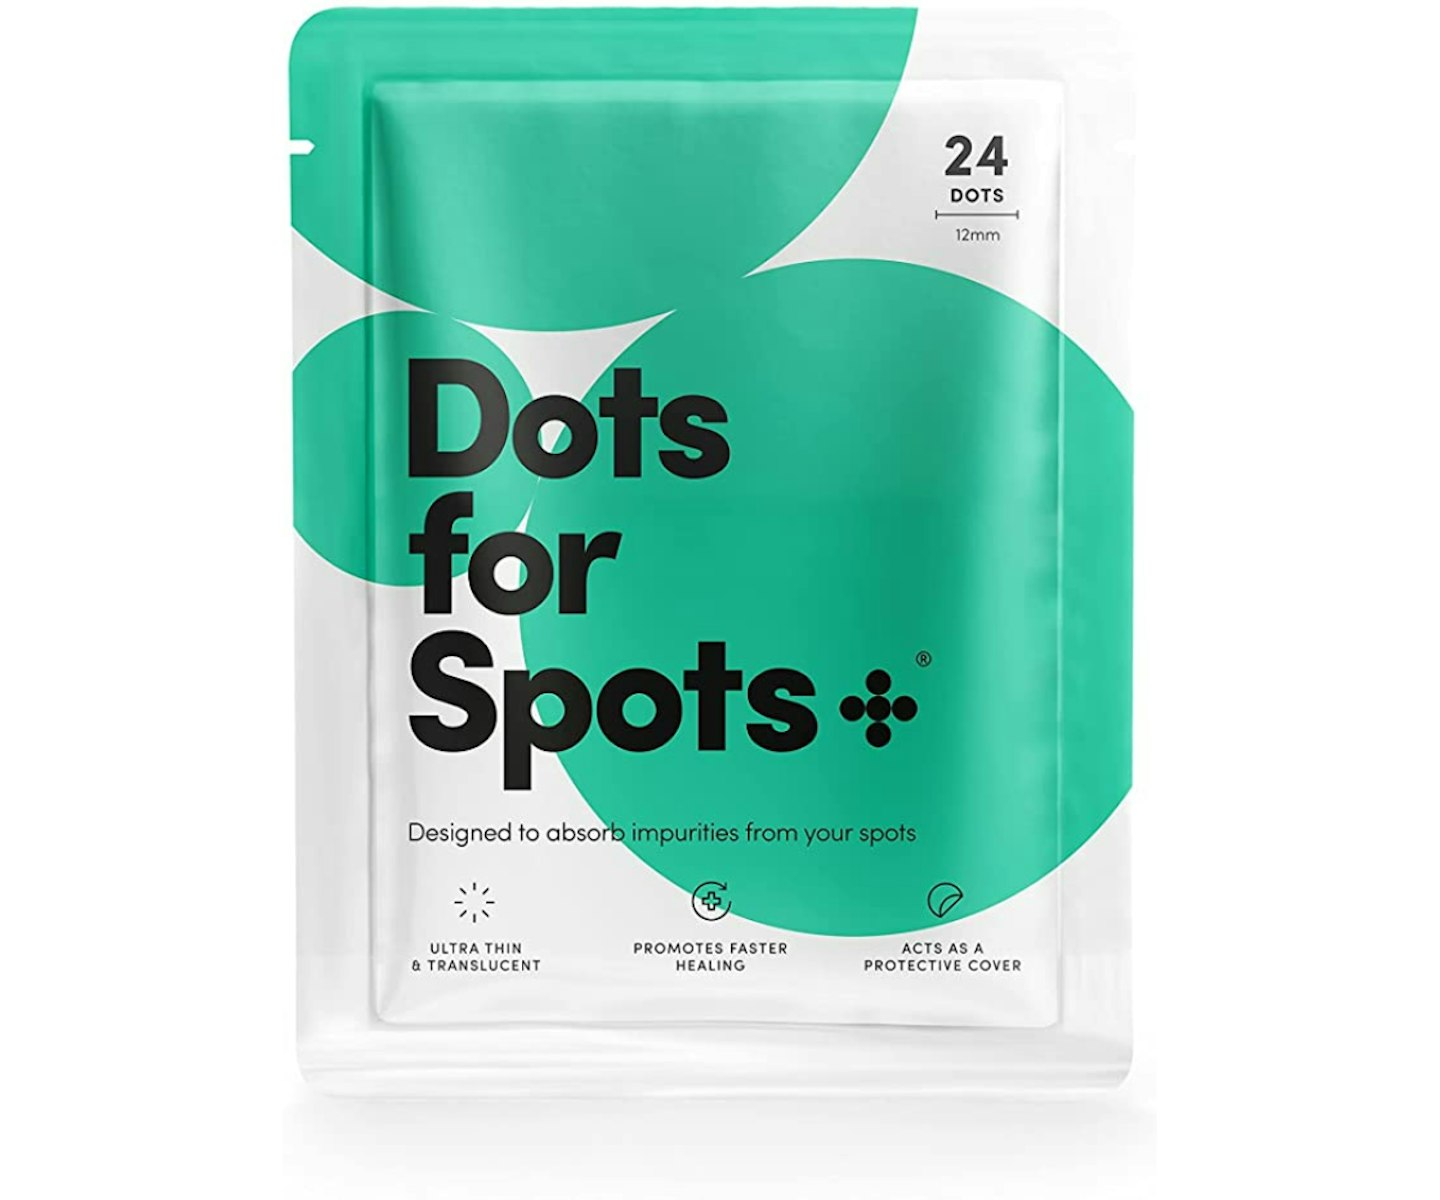 A picture of the Dots For Spots Acne Spot Treatment.